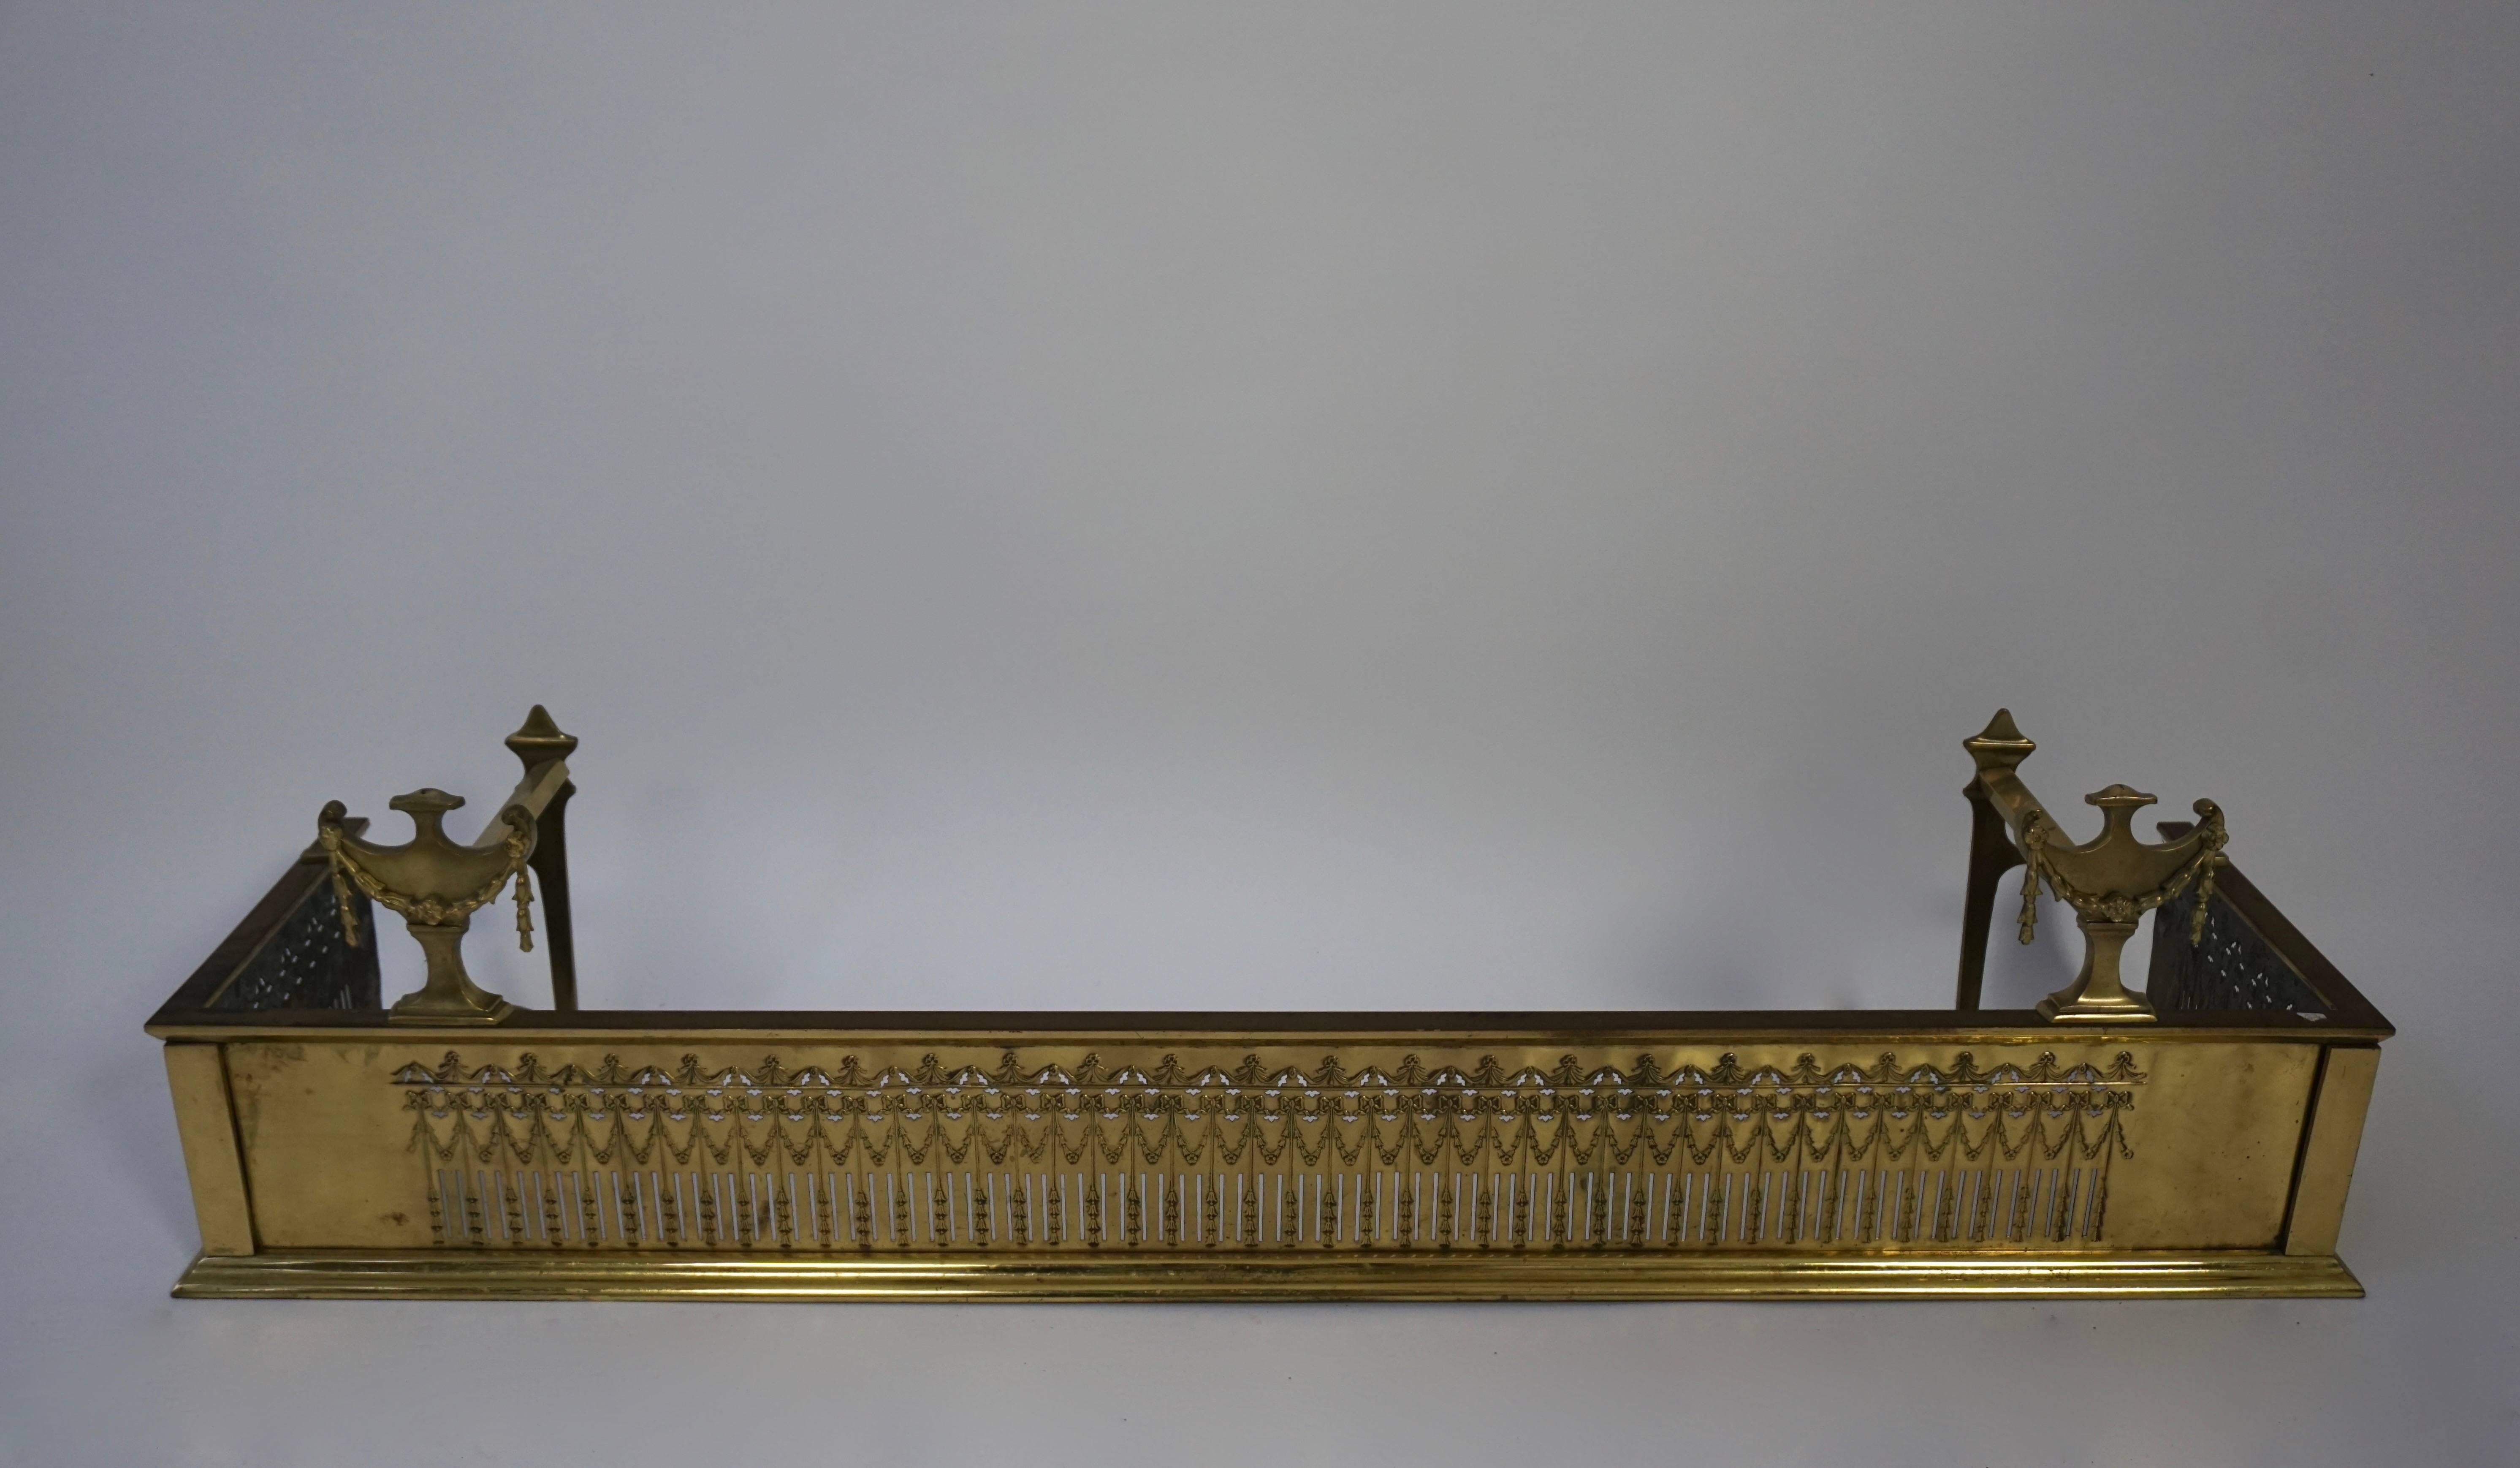 19th century English fireplace fender, fireplace screen made of brass,
Measures: Width 125 cm.
Depth 31 cm.
Height 30 cm.